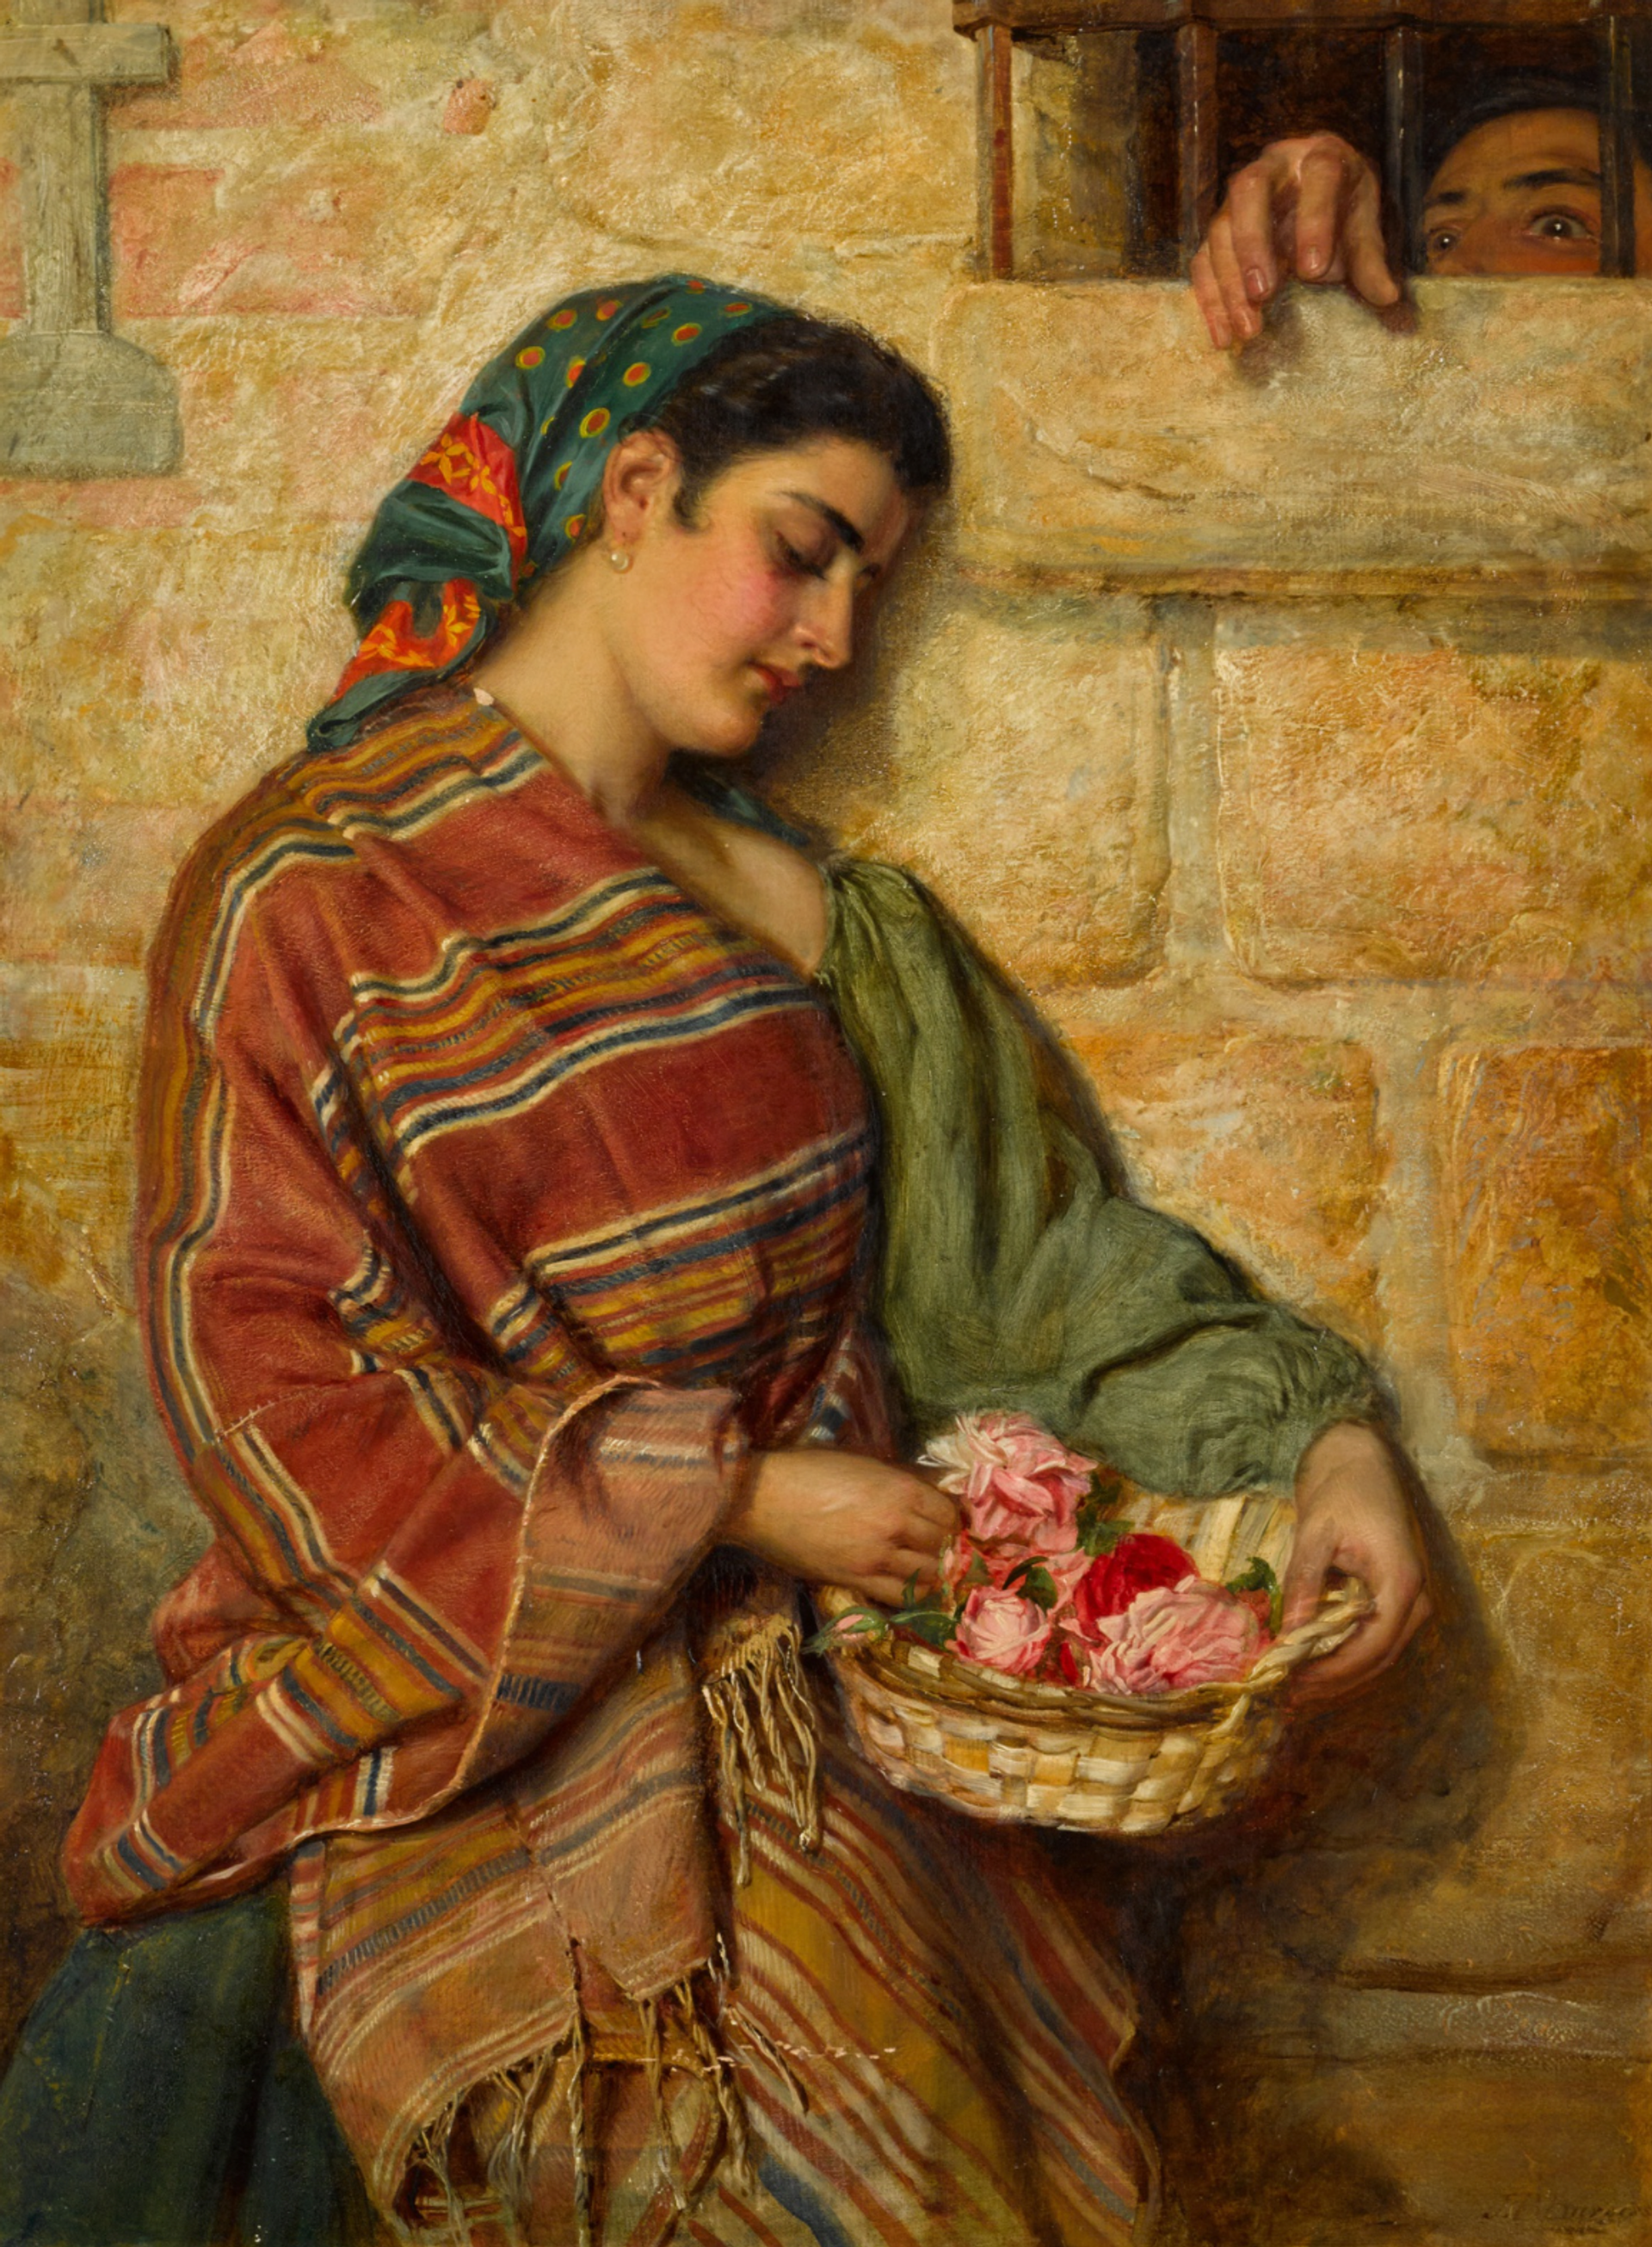 An image of the painting The Offering by John Bagnold Burgess. It shows a woman carrying a basket of flowers, about to give one to a prisoner who appears in the top right corner.